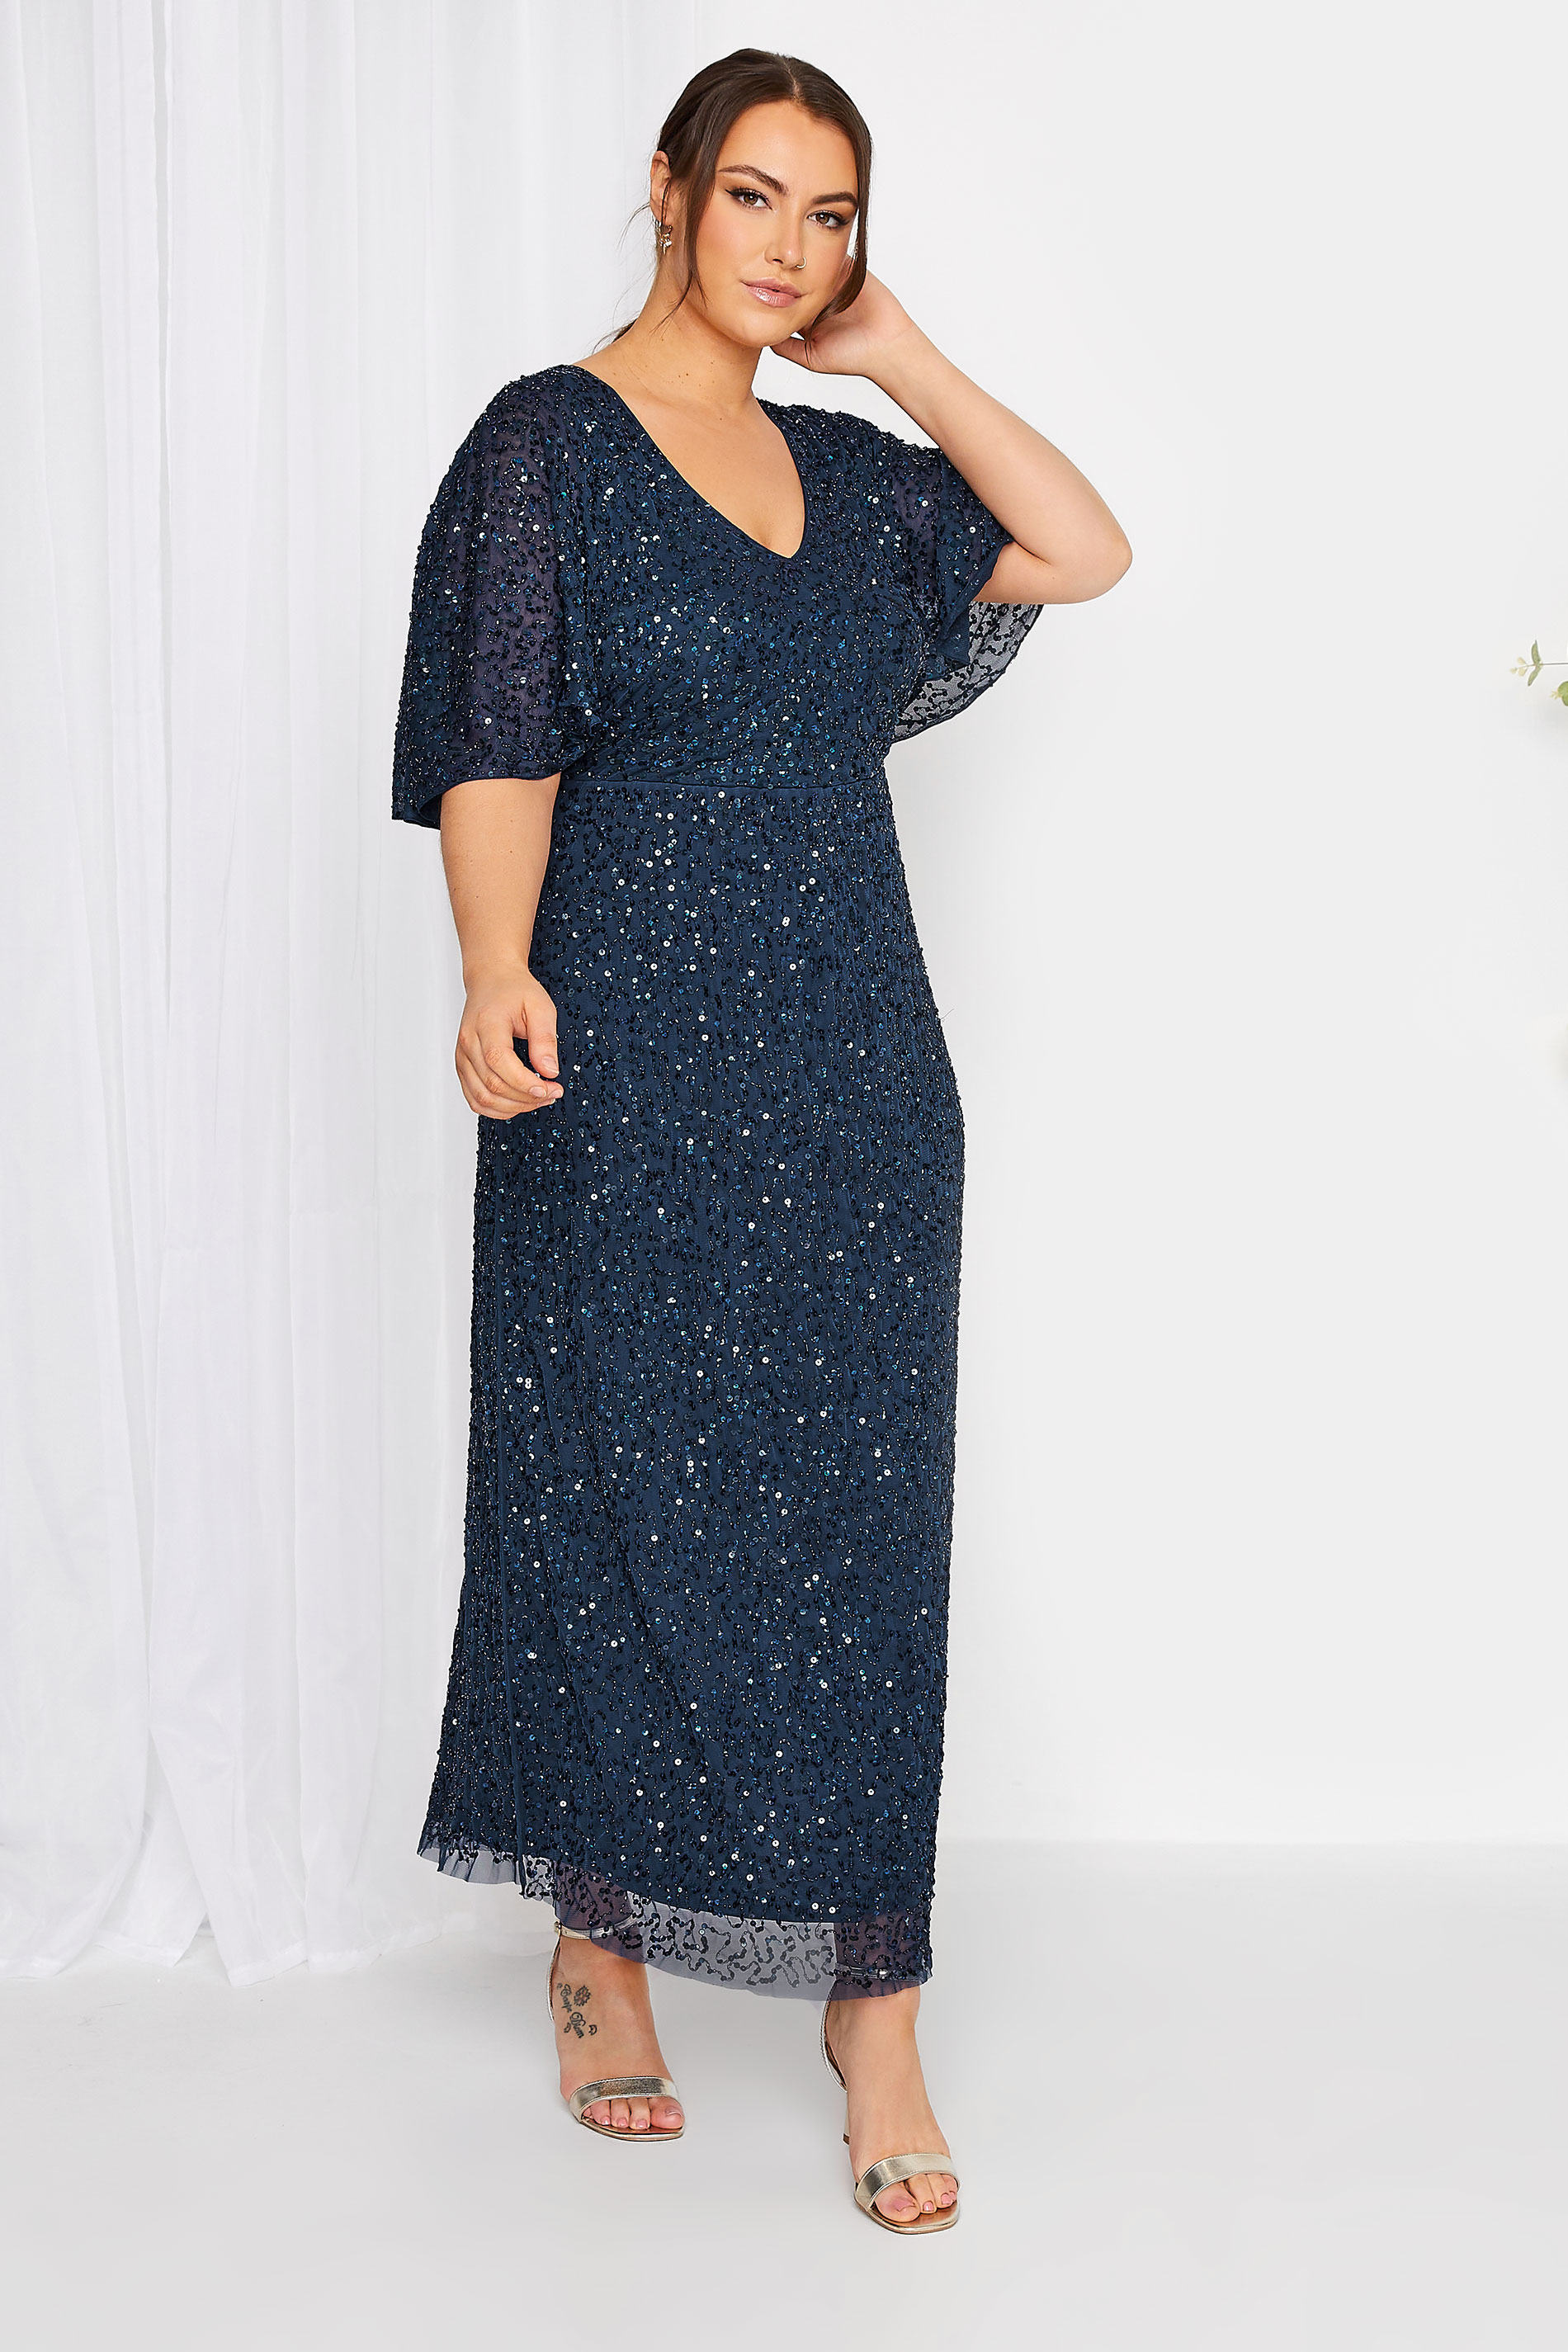 LUXE Plus Size Navy Blue Hand Embellished V-Neck Maxi Dress | Yours Clothing 2